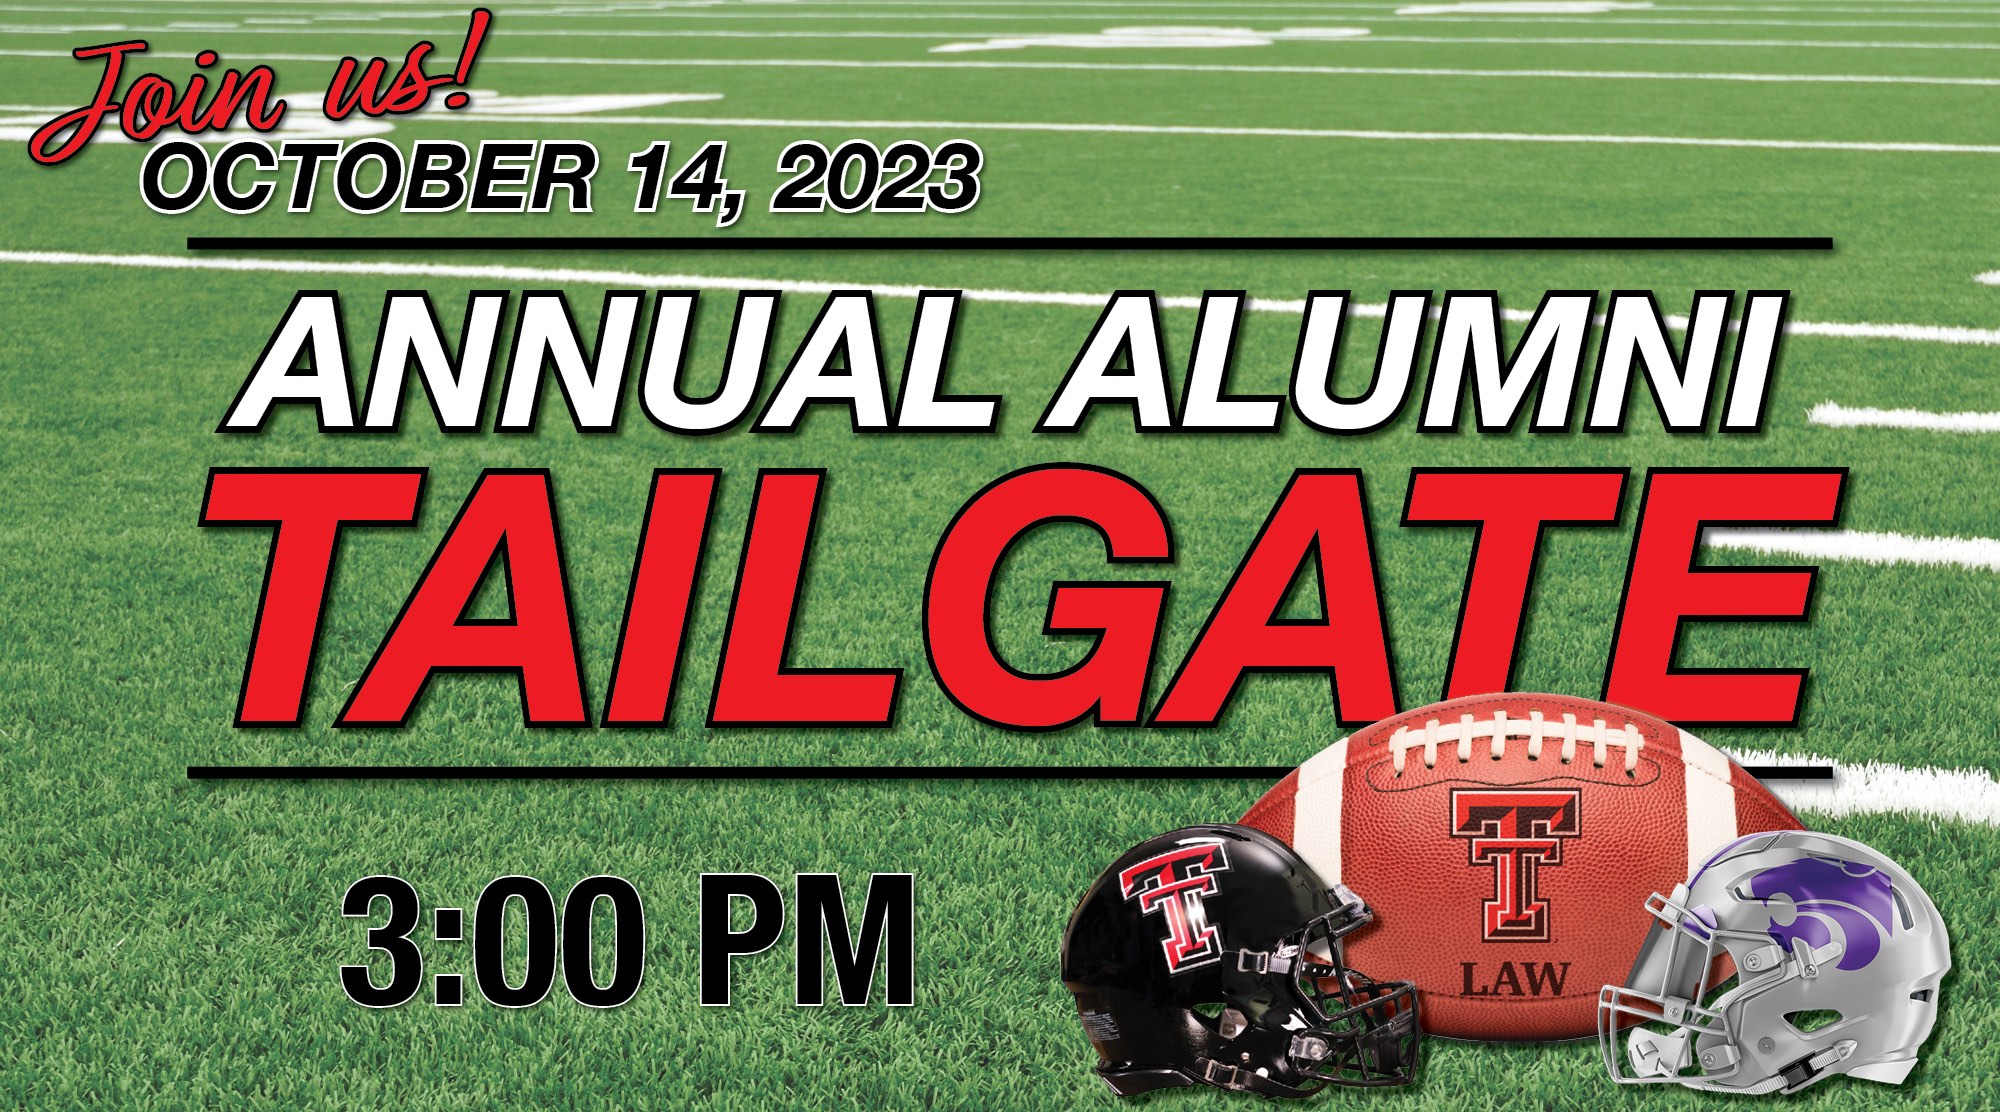 YOU AND YOUR FAMILY ARE INVITED  TO THE ANNUAL ALUMNI TAILGATE SATURDAY, OCTOBER 14, 2023 3 HOURS BEFORE KICKOFF  KANSAS STATE LAW SCHOOL FRONT LAWN PLEASE RSVP BY FRIDAY, OCTOBER 6, TO SHAWN ADAMS, ASSOCIATE DIRECTOR OF ALUMNI RELATIONS AT SHAWN.ADAMS@TTU.EDU. 